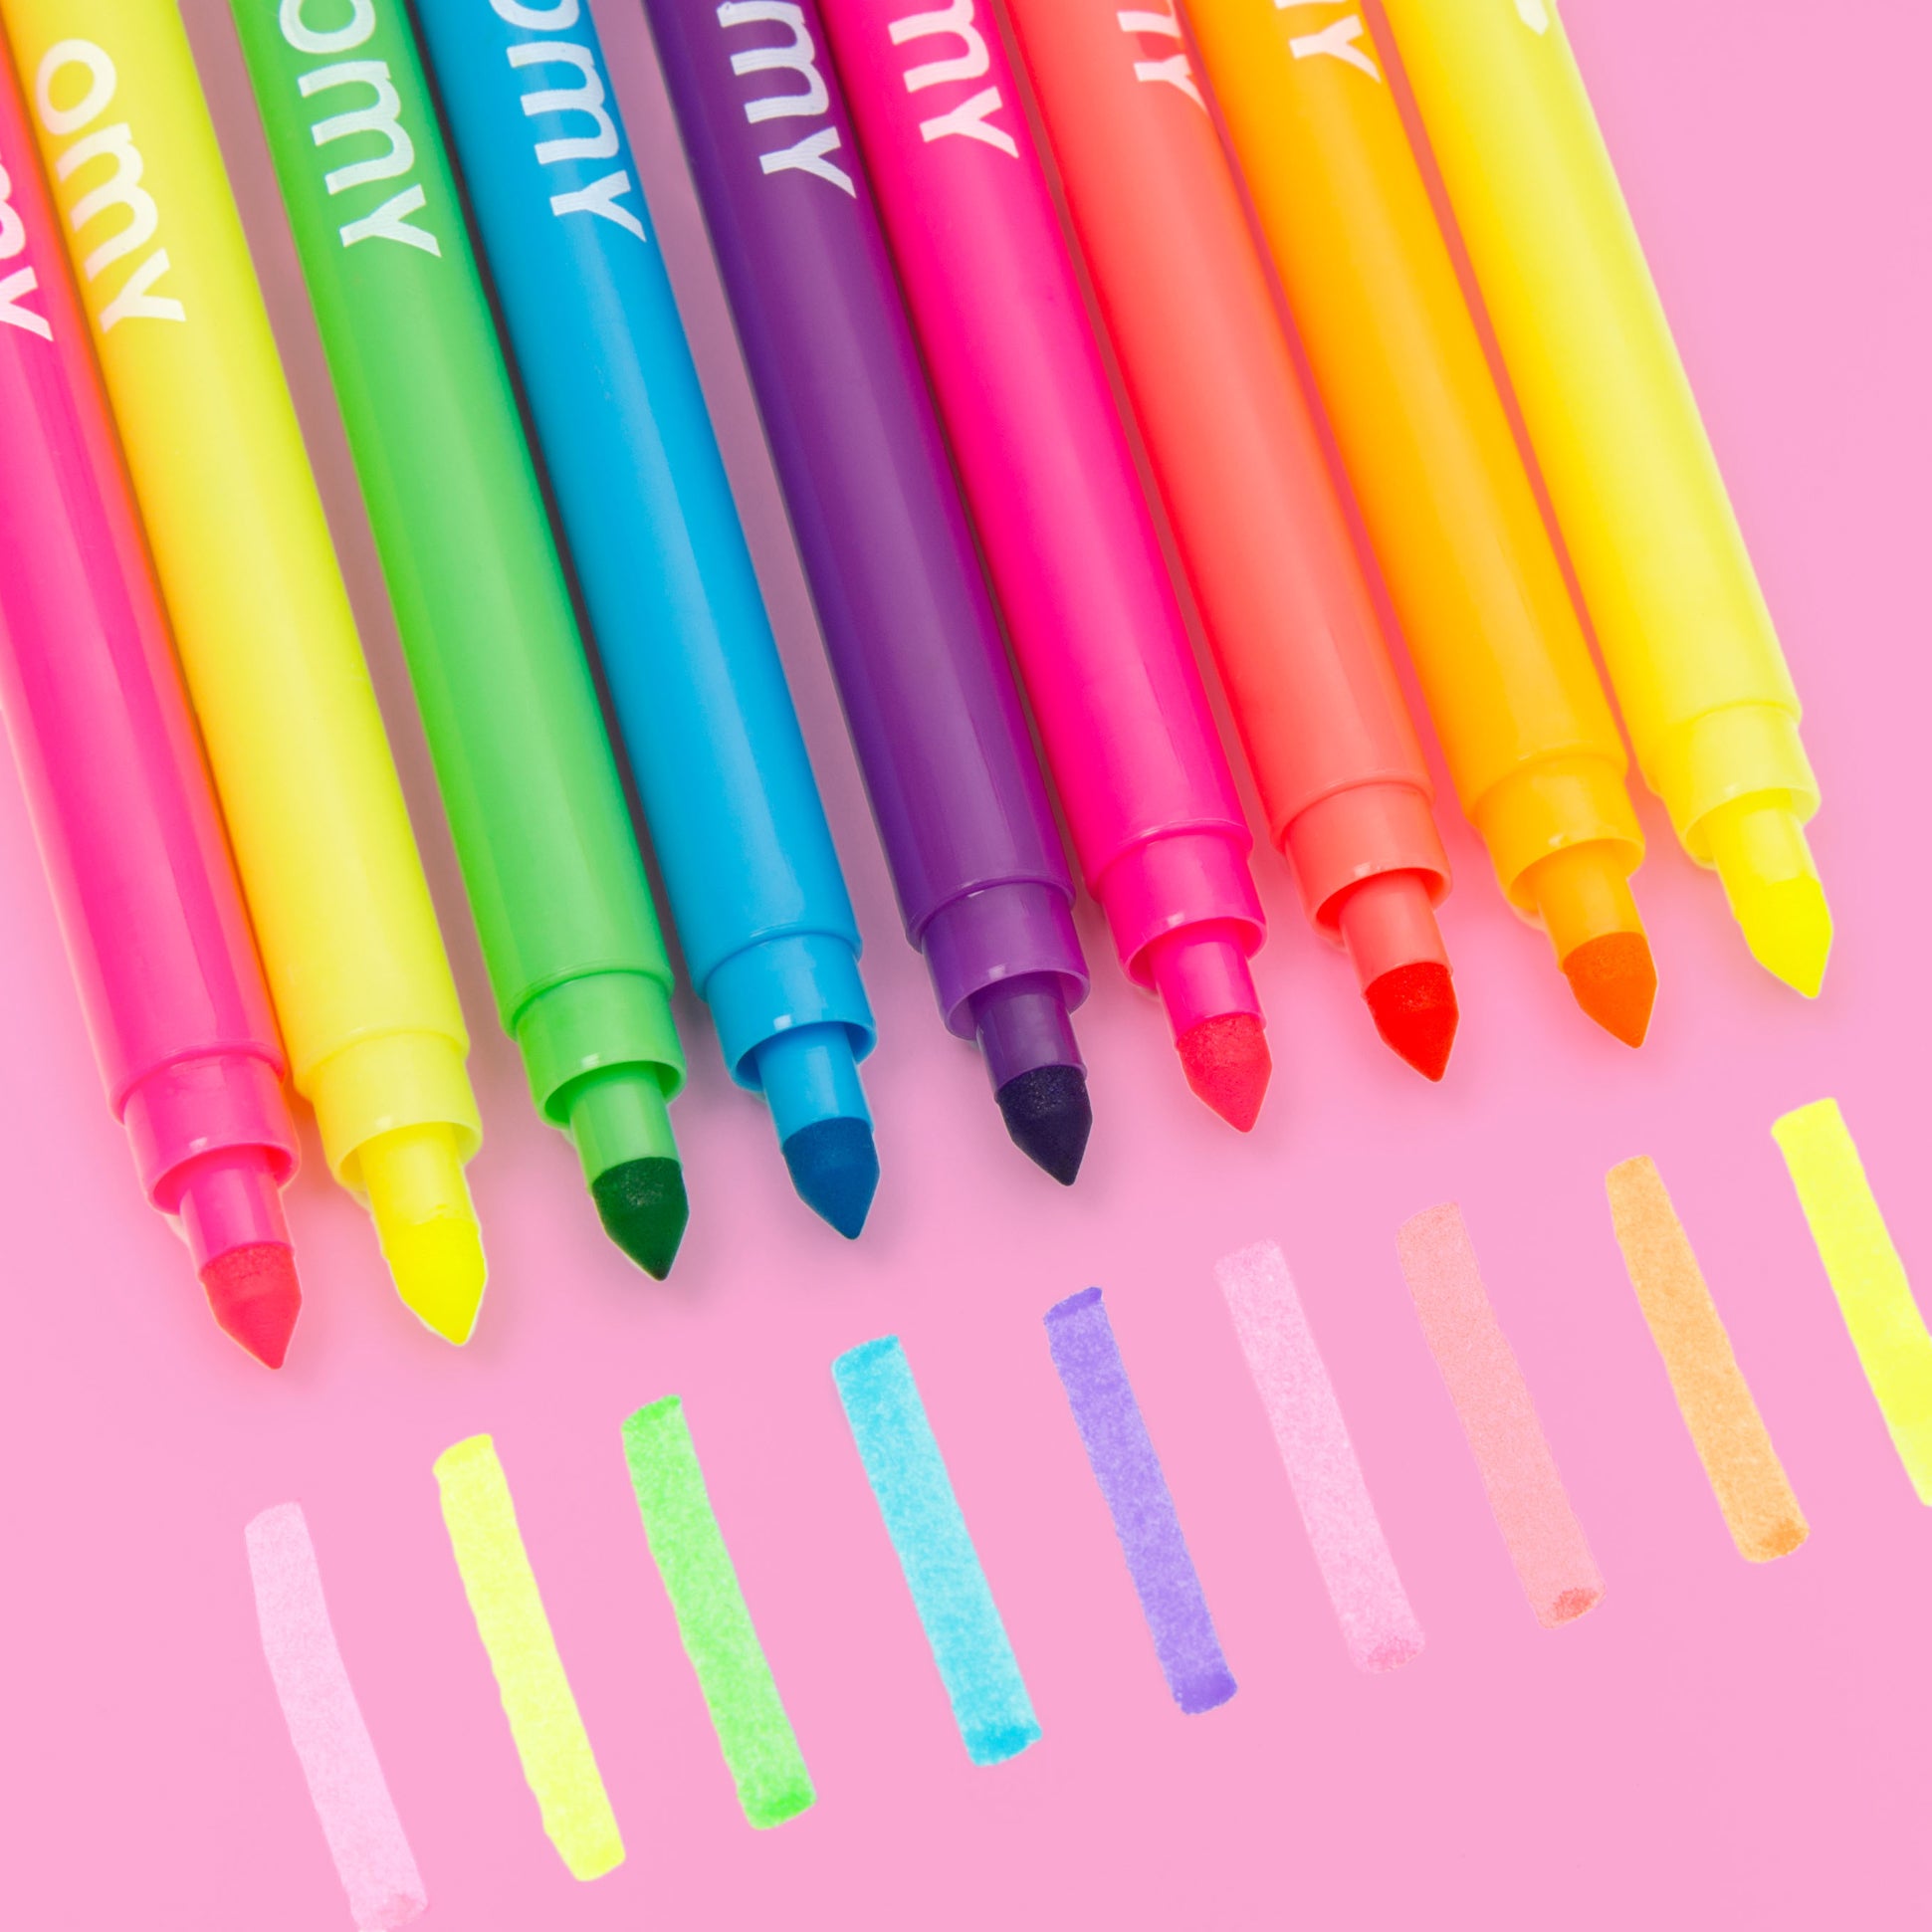 9 neon Markers